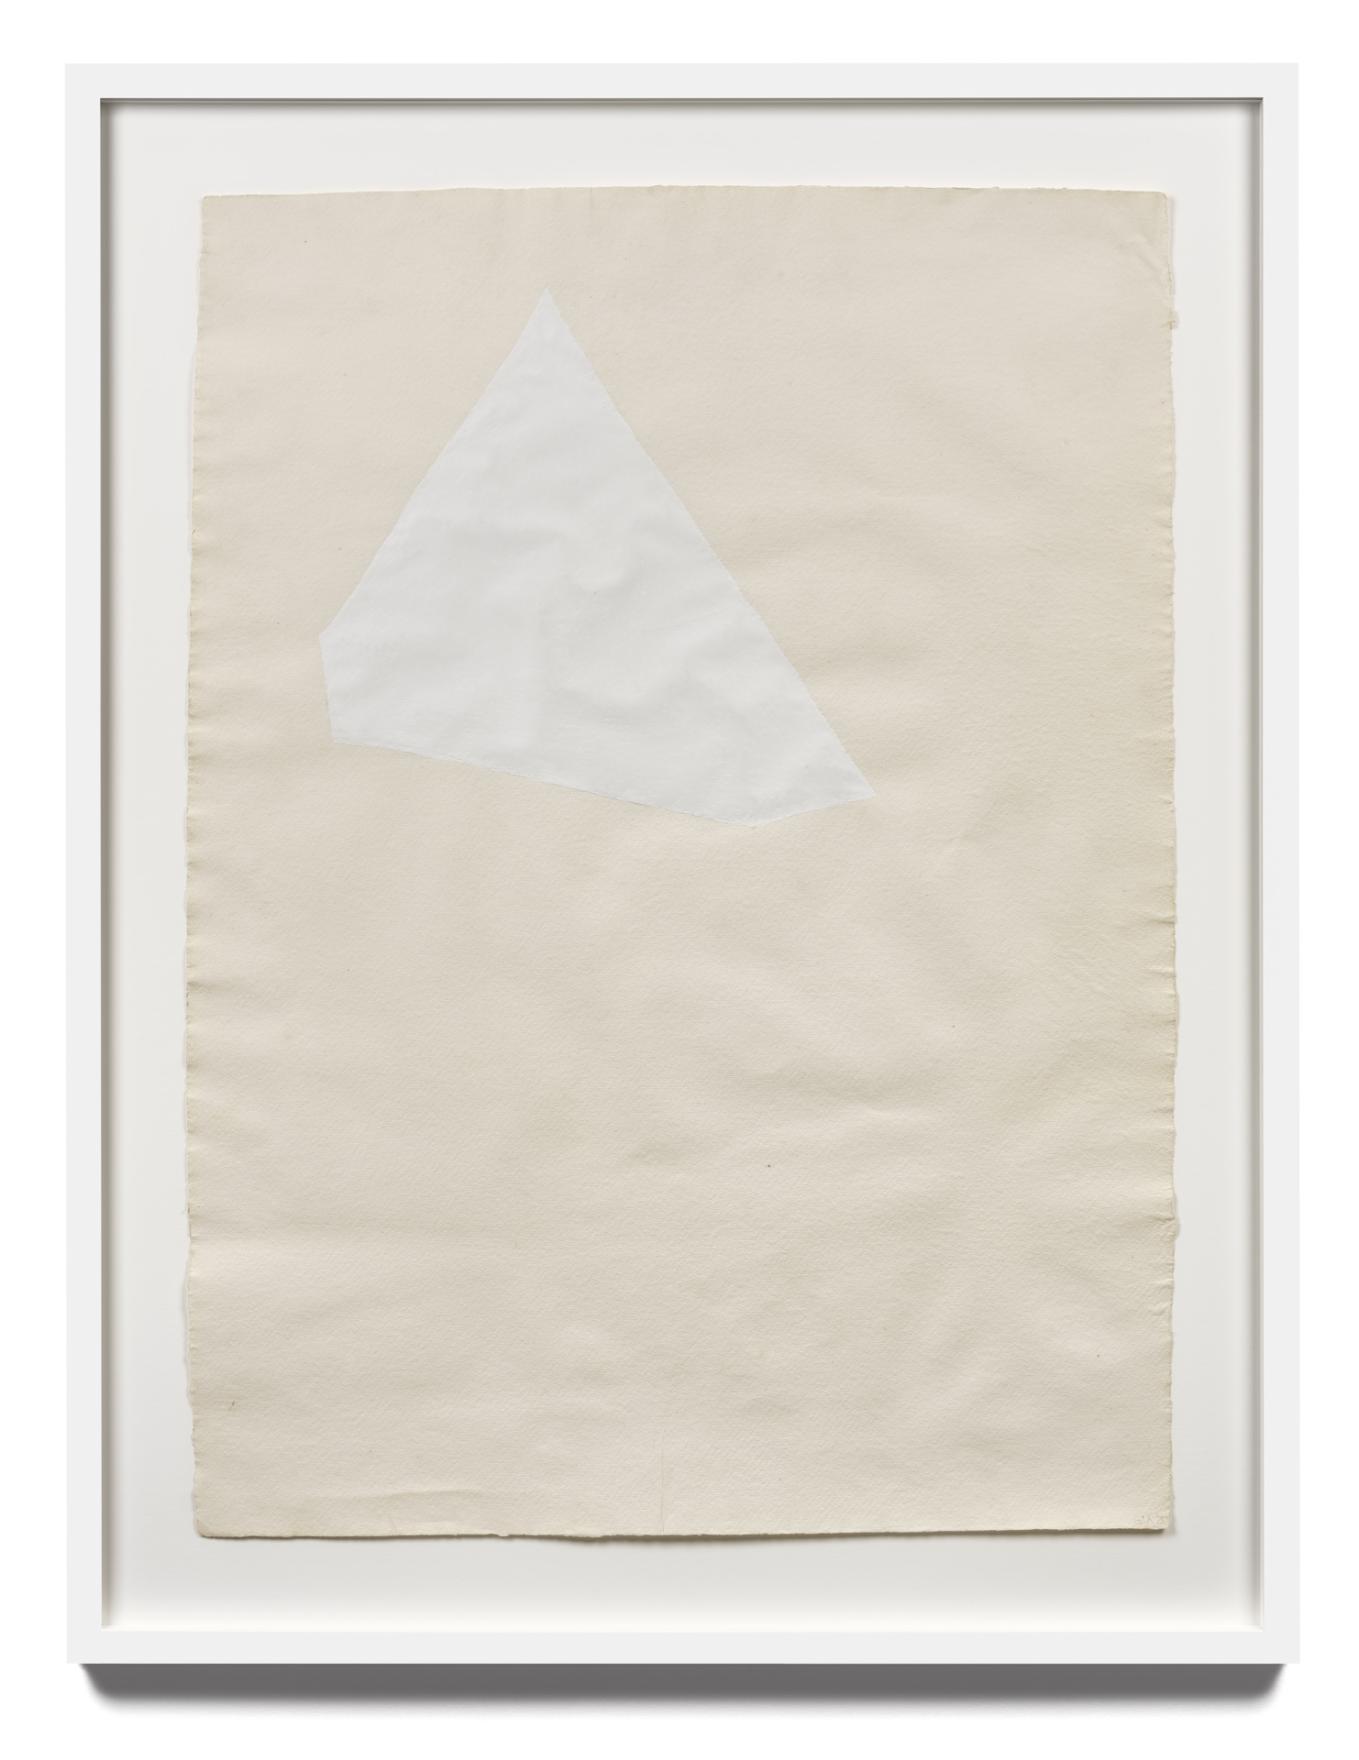 Untitled, Garry Neill Kennedy, acrylic gesso on paper, 1975, colour palette source for I WONDER, Art Metropole, Toronto, 2021